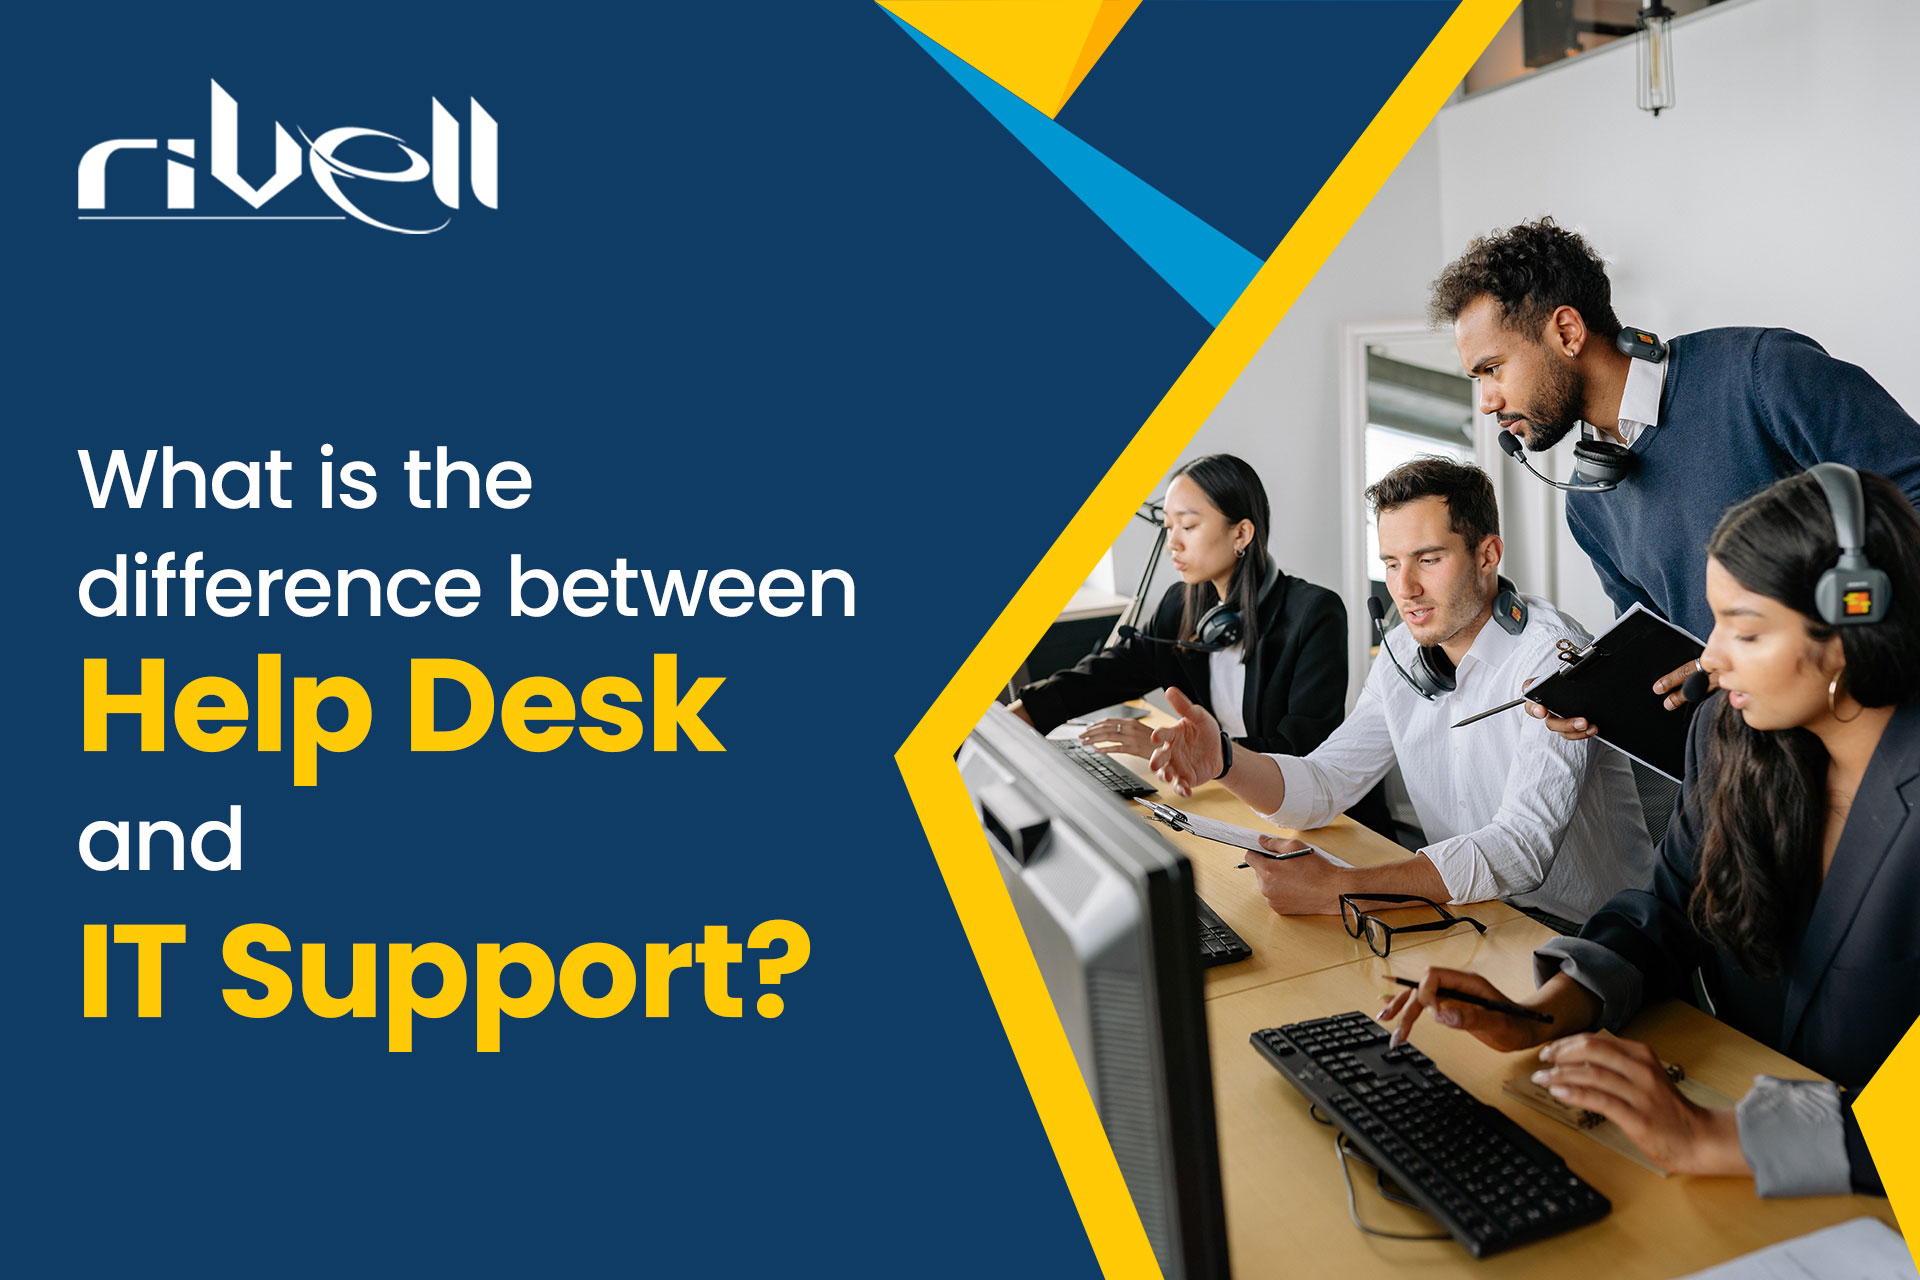 What is the difference between help desk and IT support